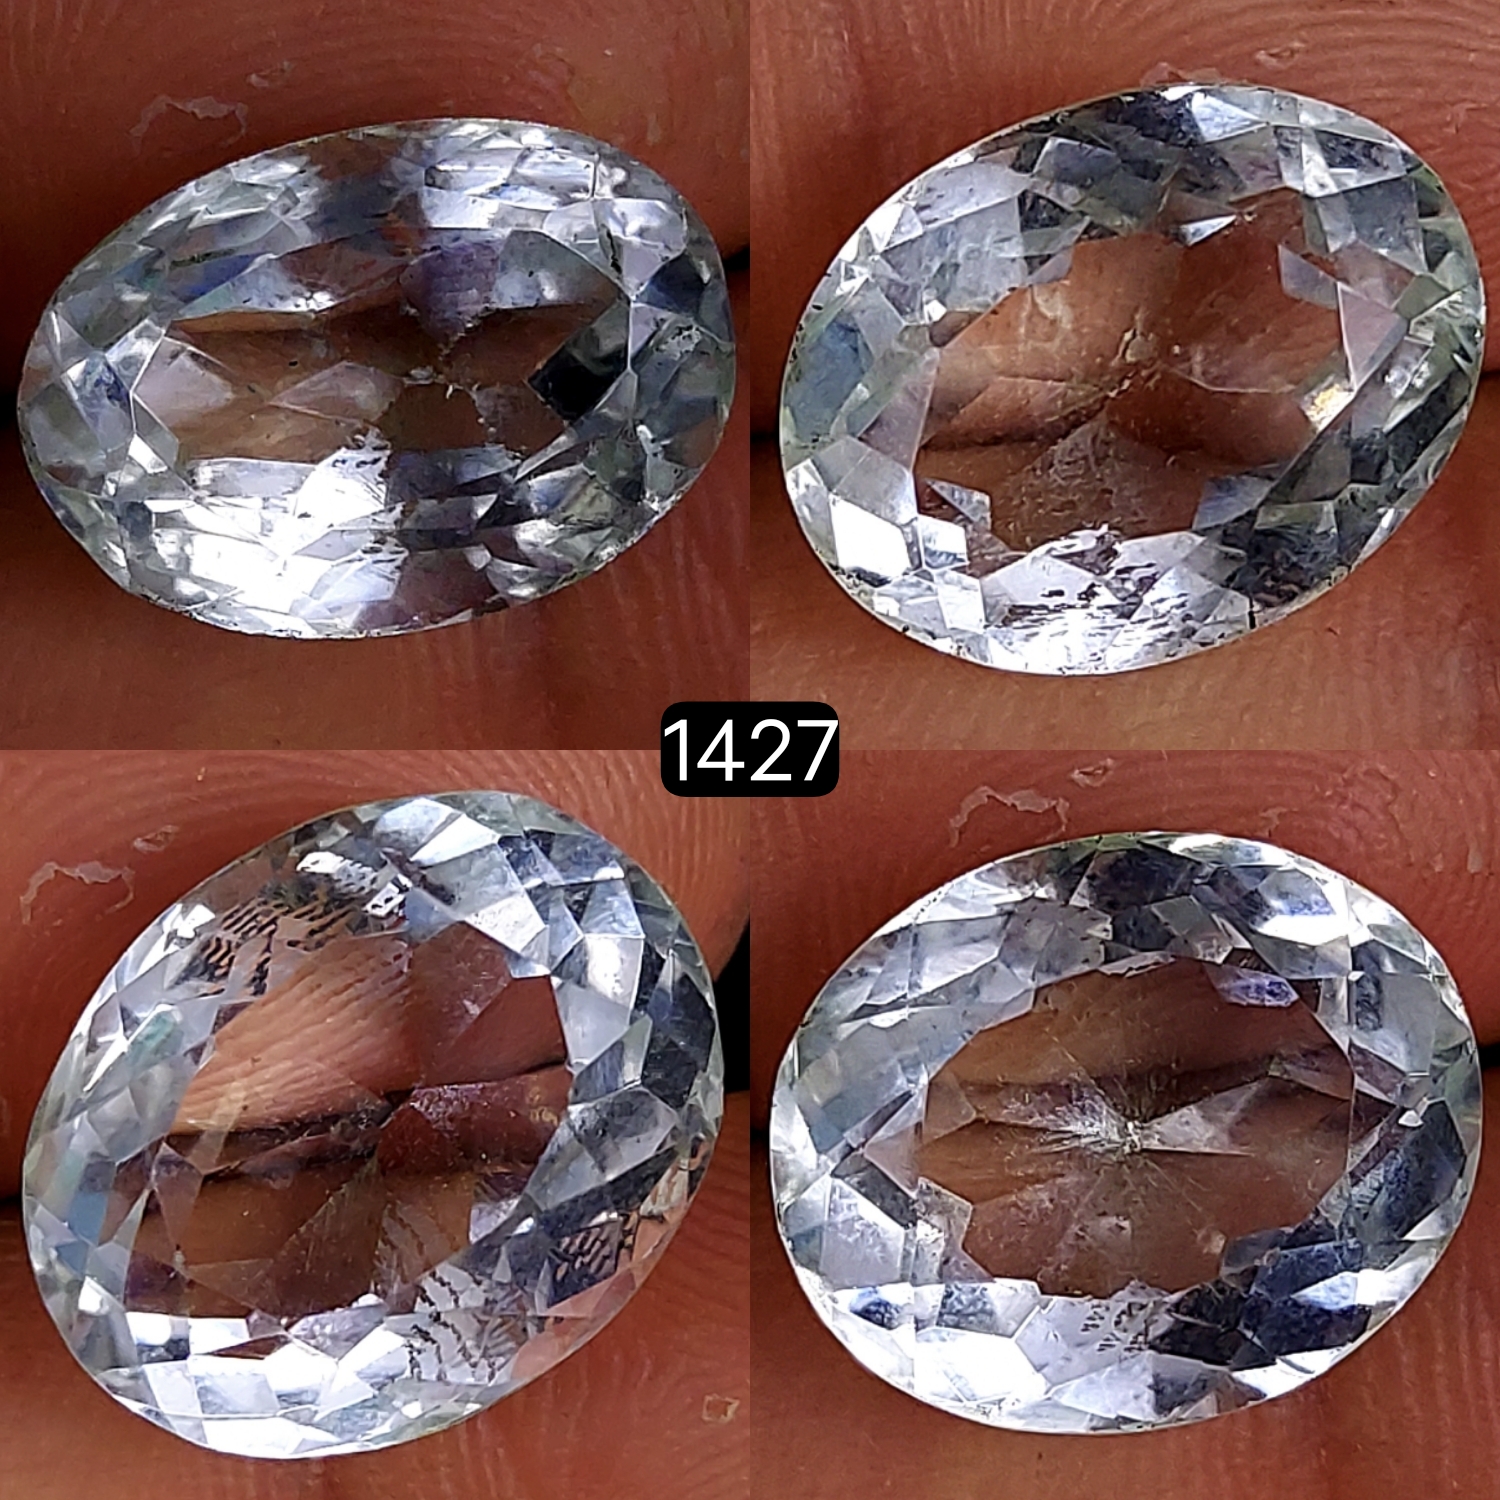 4Pcs 54Cts Natural Crystal Quartz Faceted Cabochon Gemstone Clear Quartz Crystal Loose Gemstone for Jewelry Making Mixed Shape Pendents 20x15 16x12mm#1427